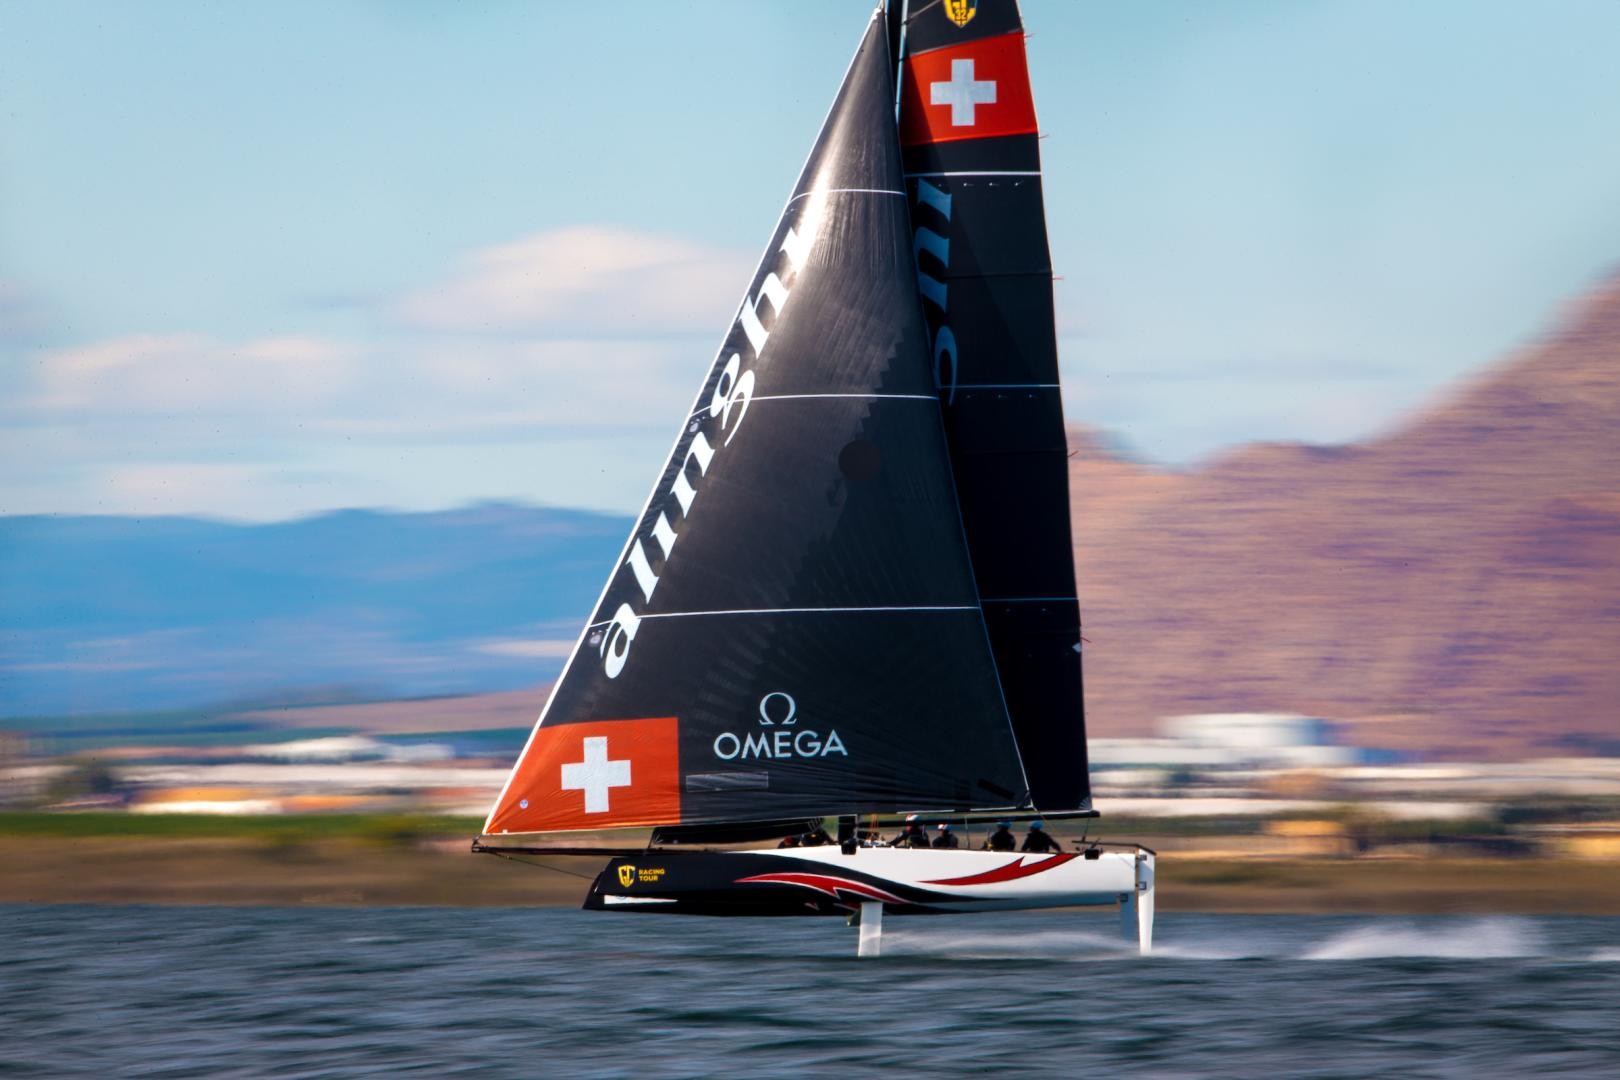 Alinghi at pace today, despite the light conditions. Photo: Sailing Energy / GC32 Racing Tour. 